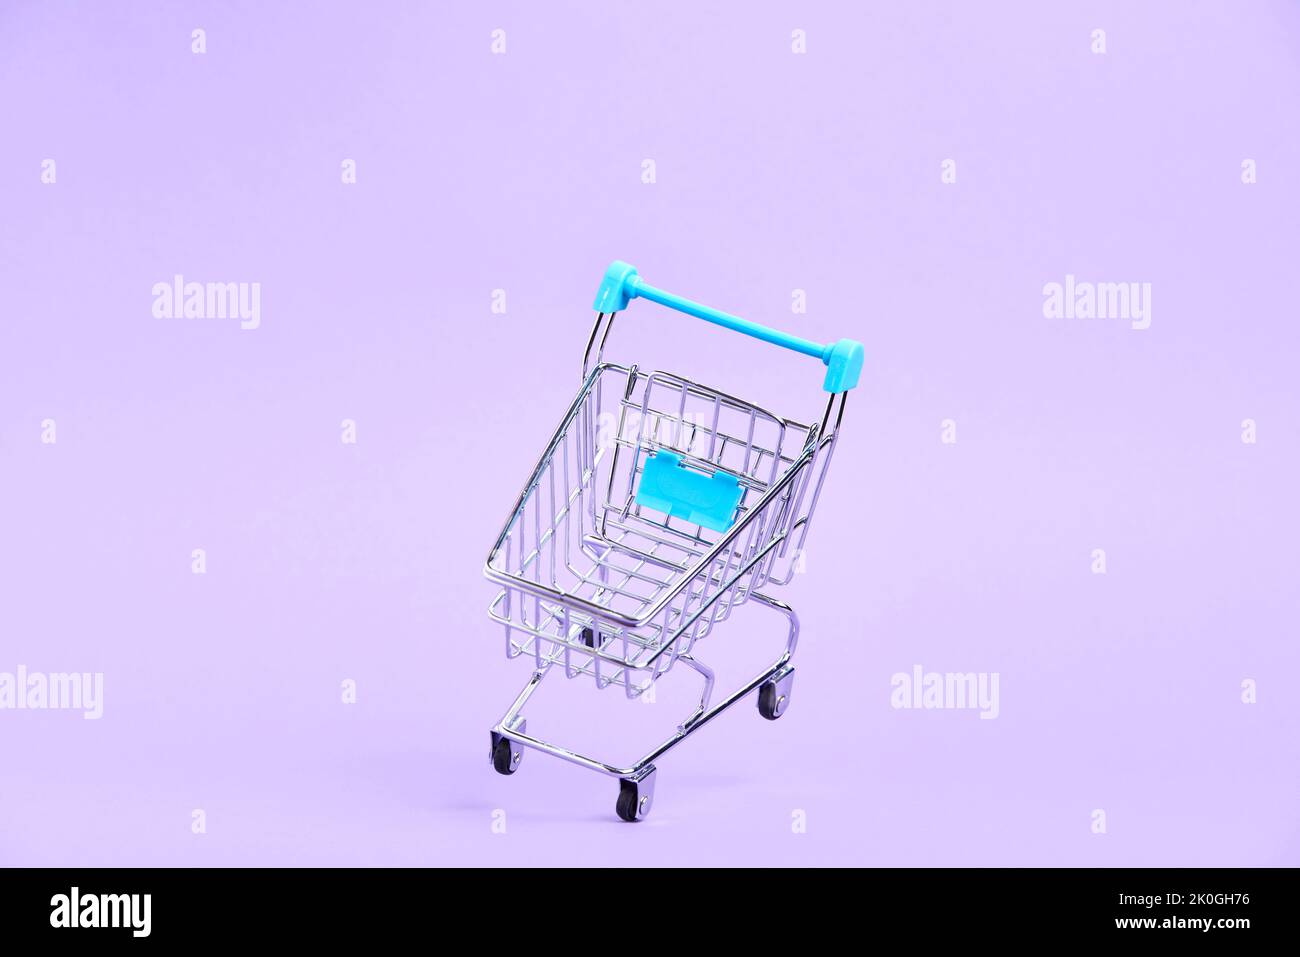 Empty shopping cart with light blue details floating on a pastel lilac background. Minimalist design with copy space. Concepts: market deals, seasonal Stock Photo